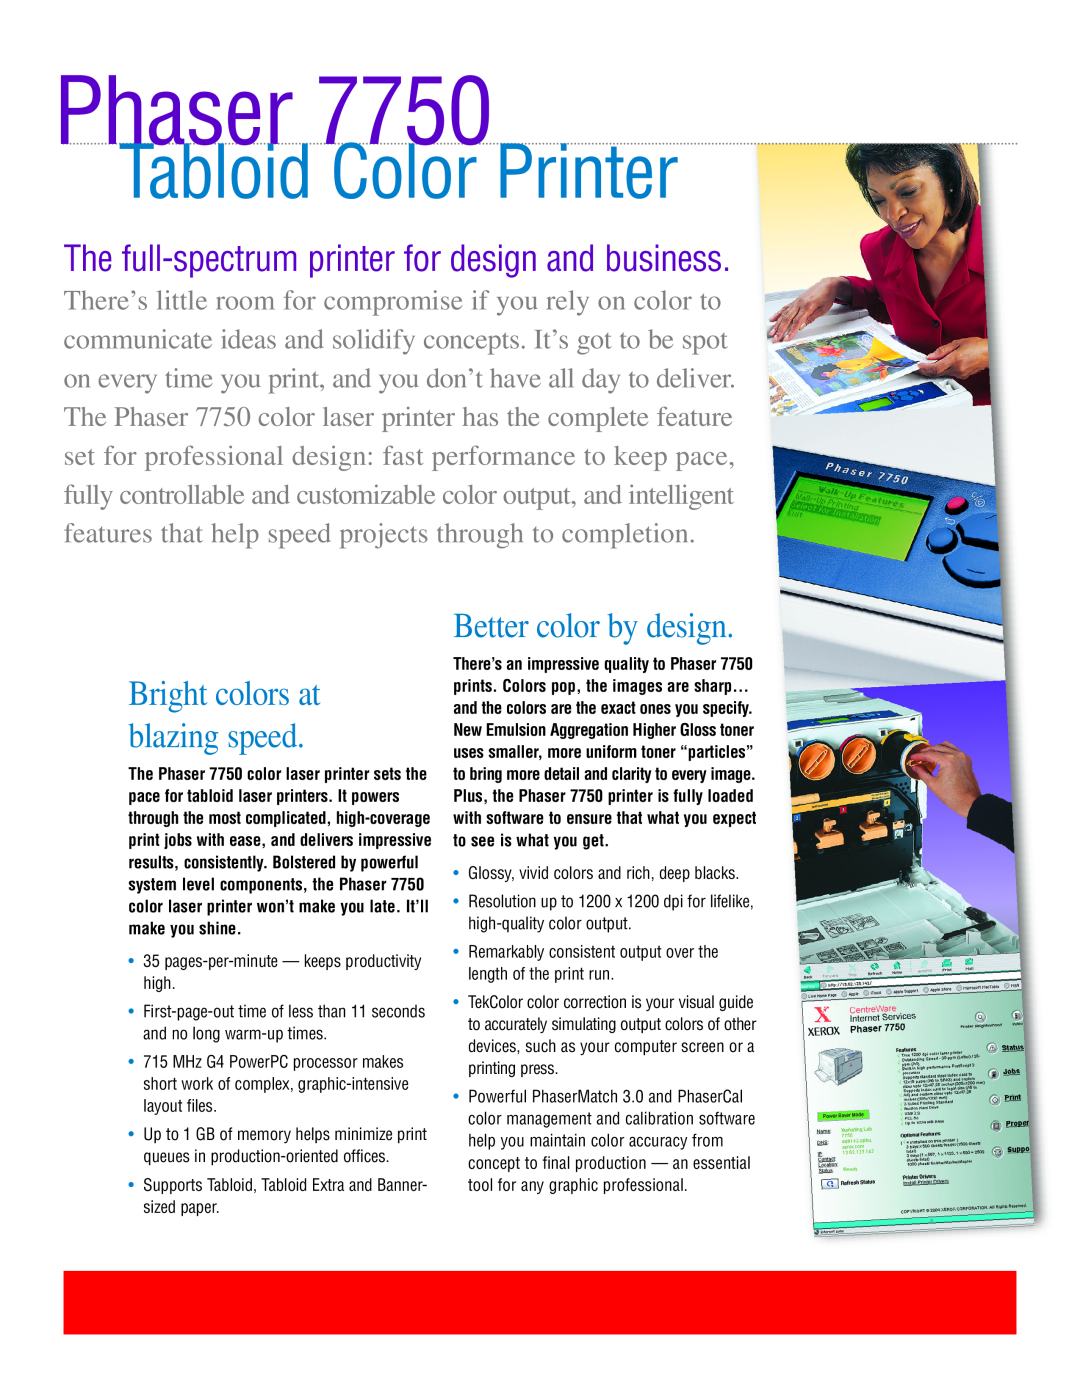 Xerox 7750 manual Better color by design, Phaser, Tabloid Color Printer, The full-spectrum printer for design and business 